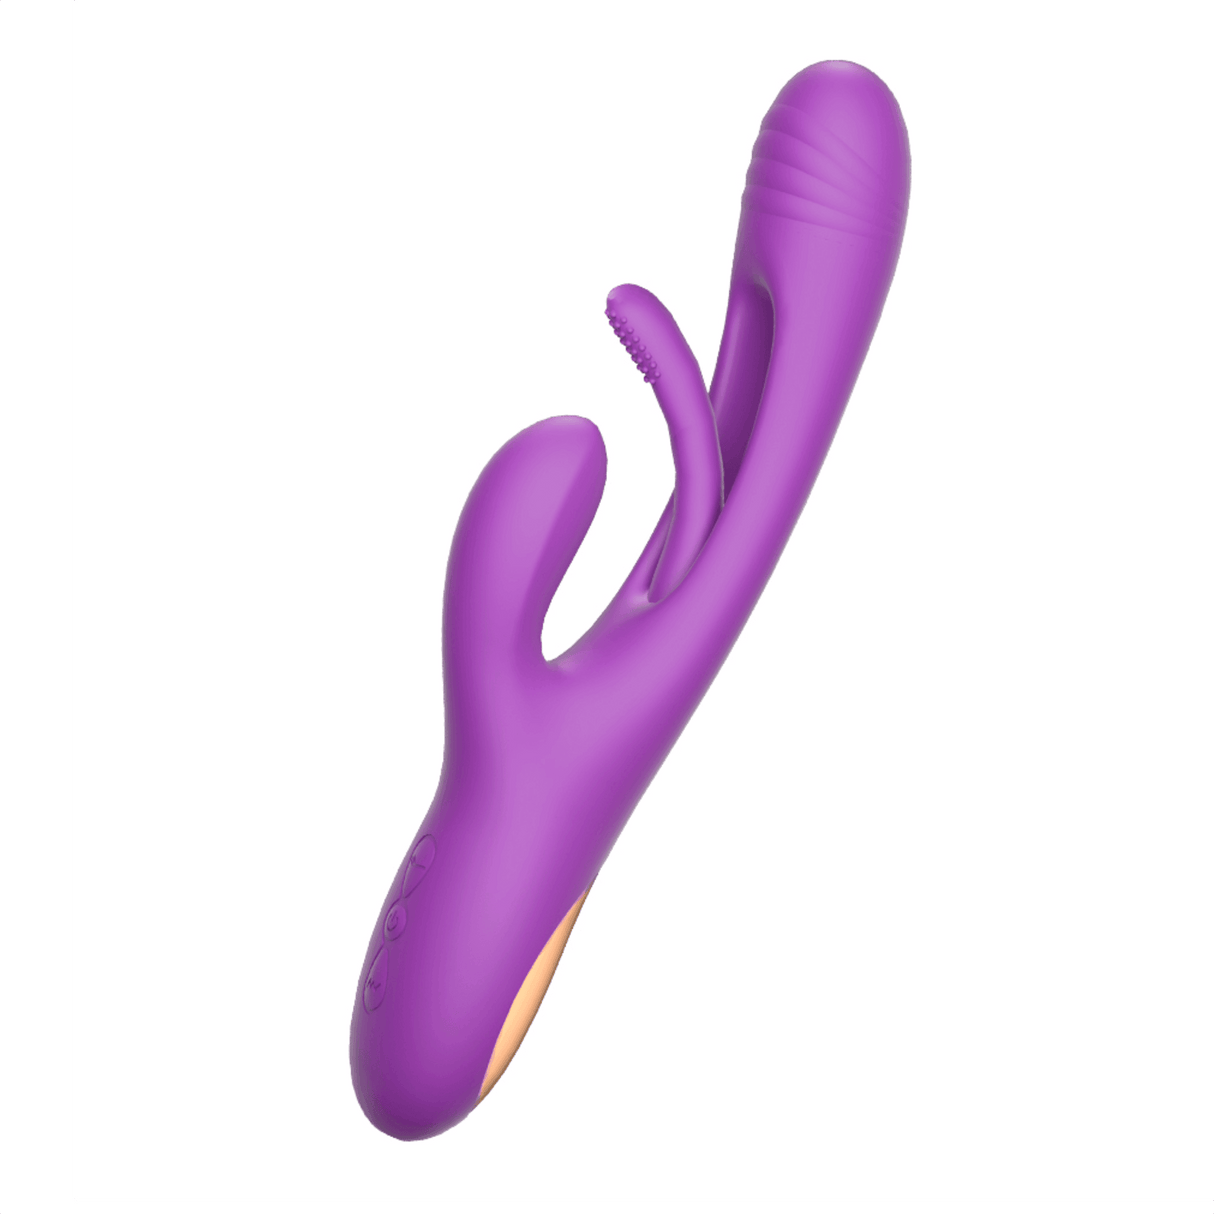 AdultLuxe Tapper-3 in 1 Clitoral & GSpot Vibrator with Tapping Function